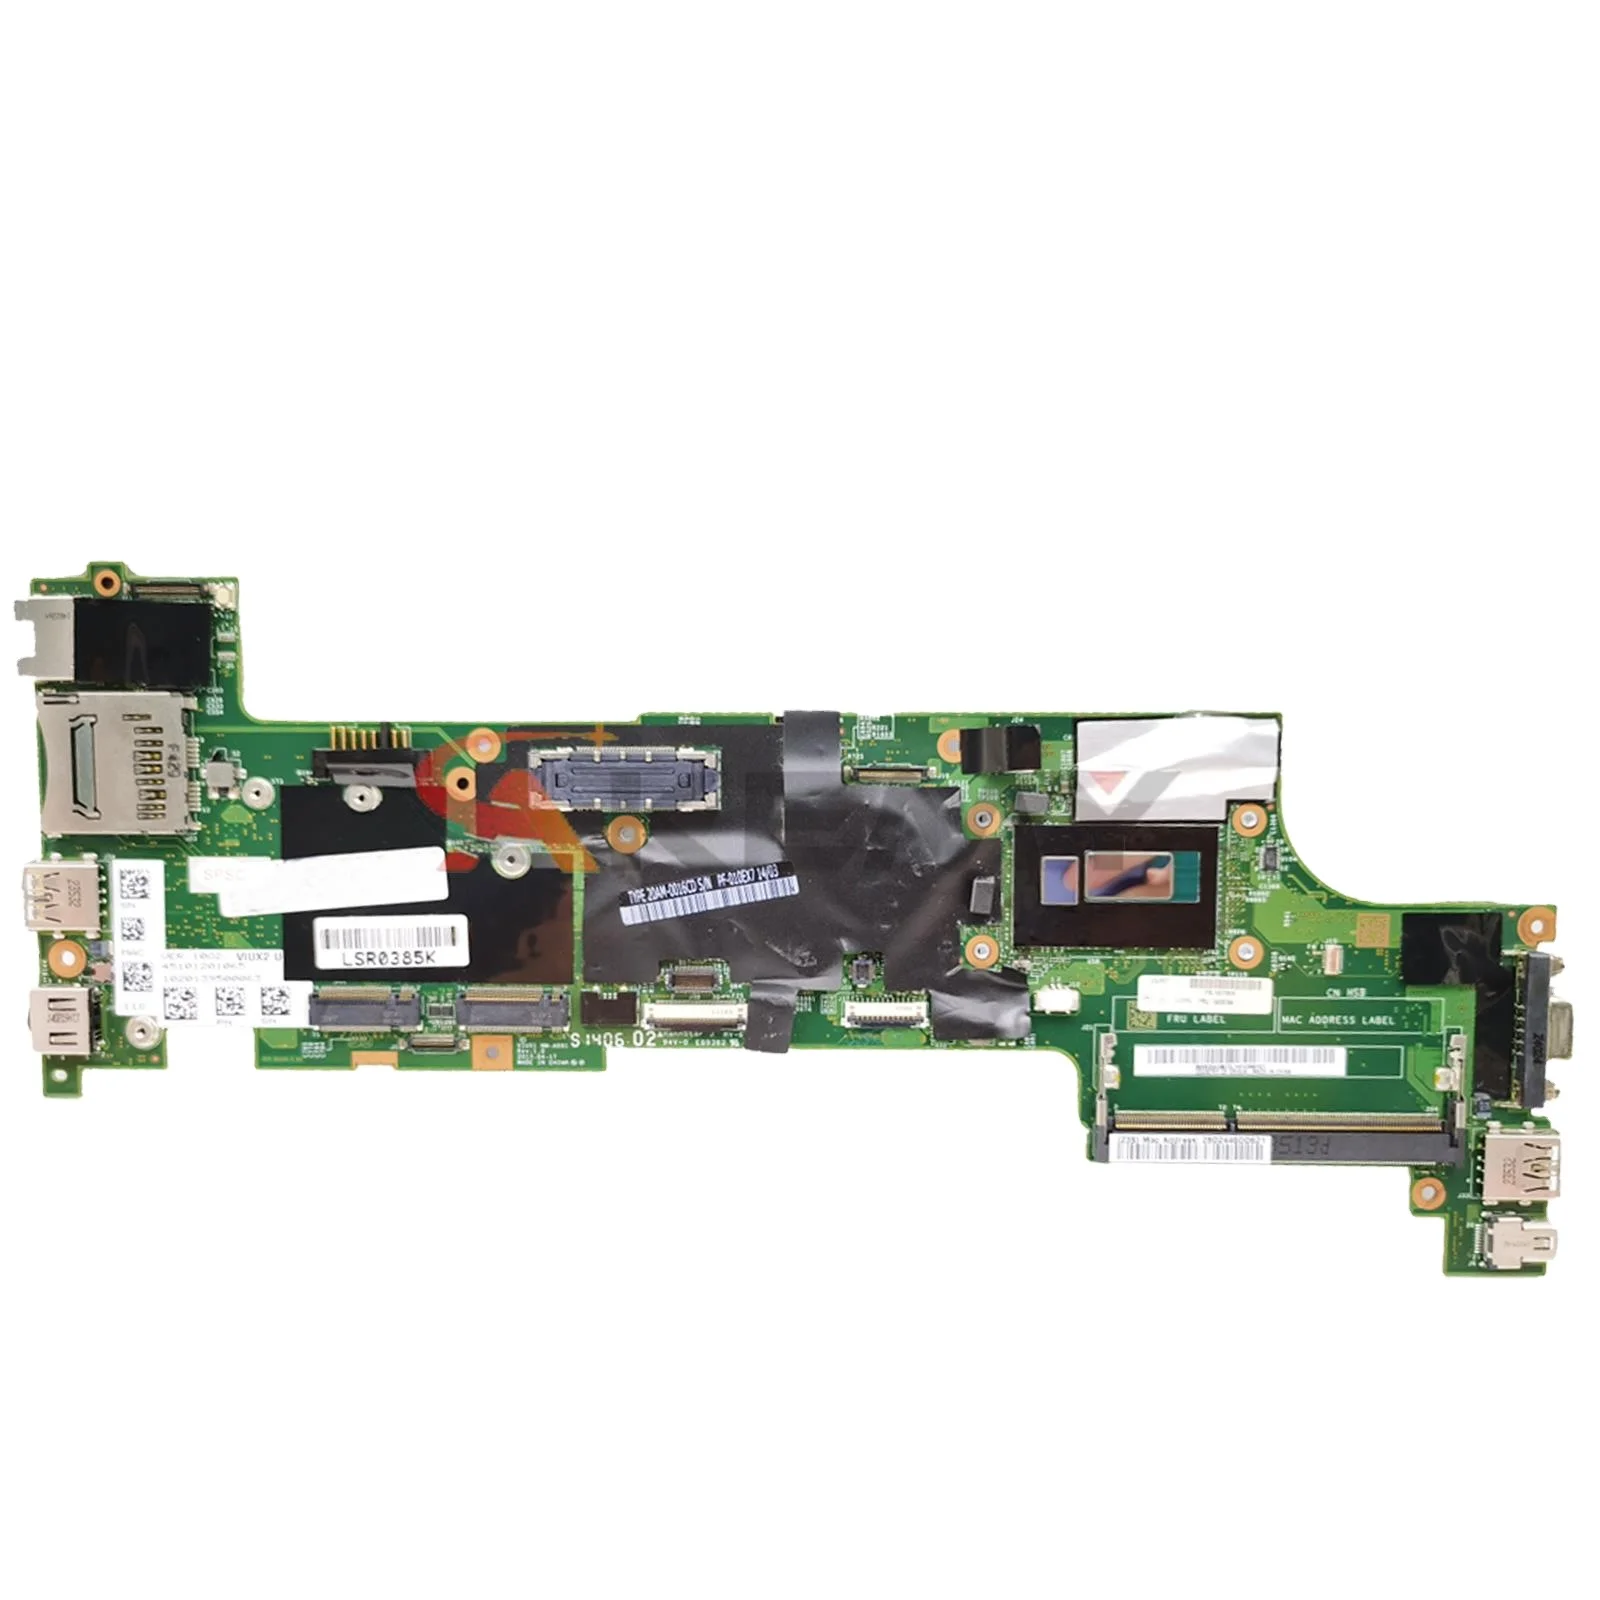 

For Lenovo Thinkpad X250 X240 Laptop motherboard Mainboard CPU I3 I5 I7 4th or 5th Gen CPU NM-A091 motherboard DDR3